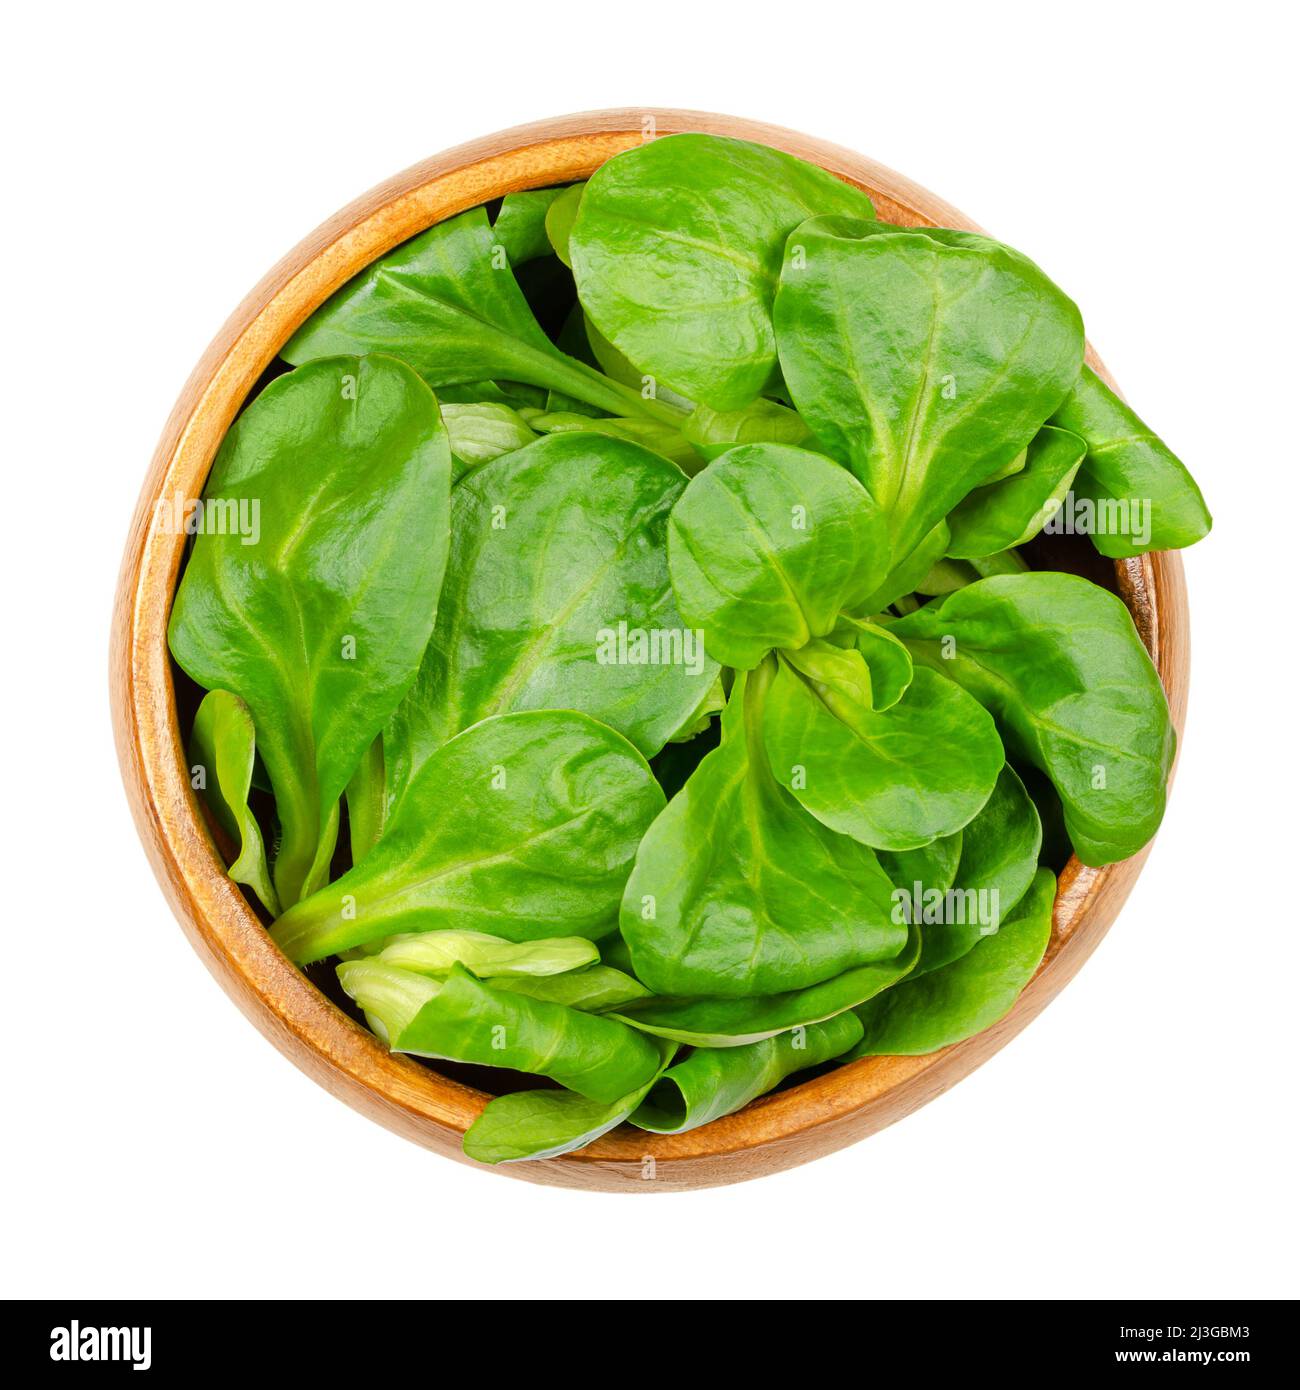 Fresh lambs lettuce, in a wooden bowl. Valerianella locusta, also known as common cornsalad, nut lettuce or field salad. Grows as small rosettes. Stock Photo